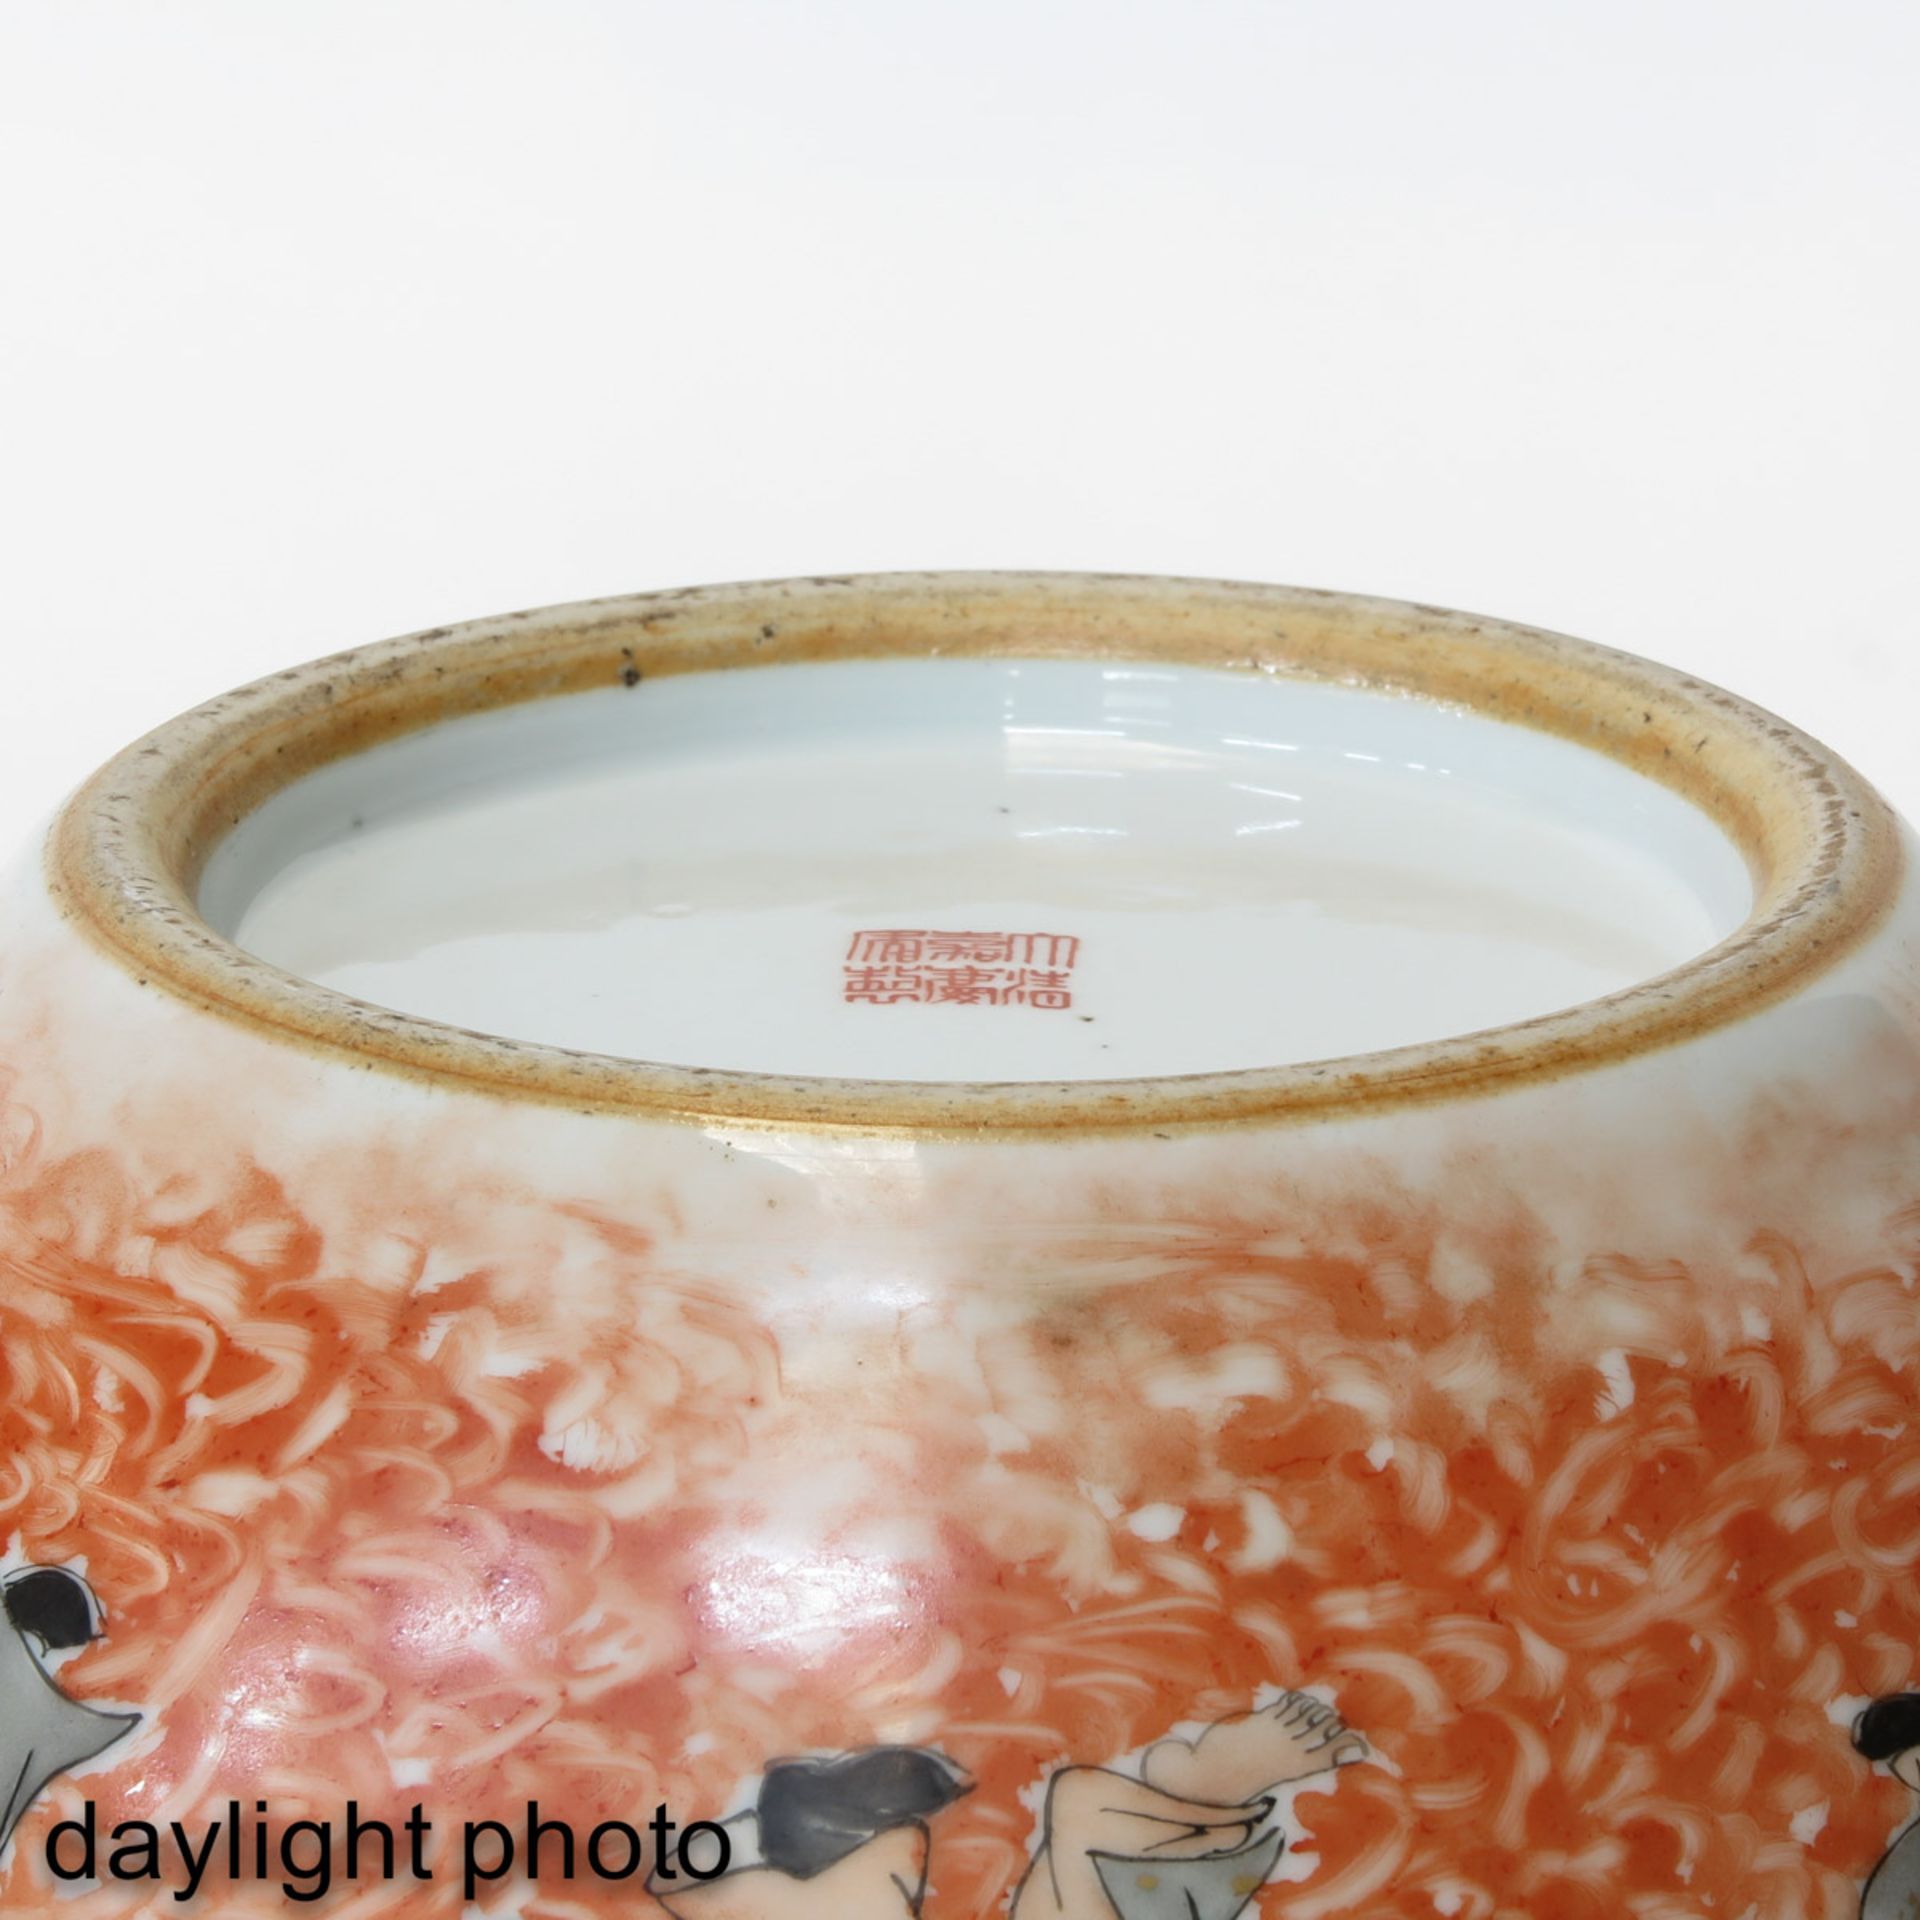 A Polyhchrome Decor Fish Bowl - Image 8 of 10